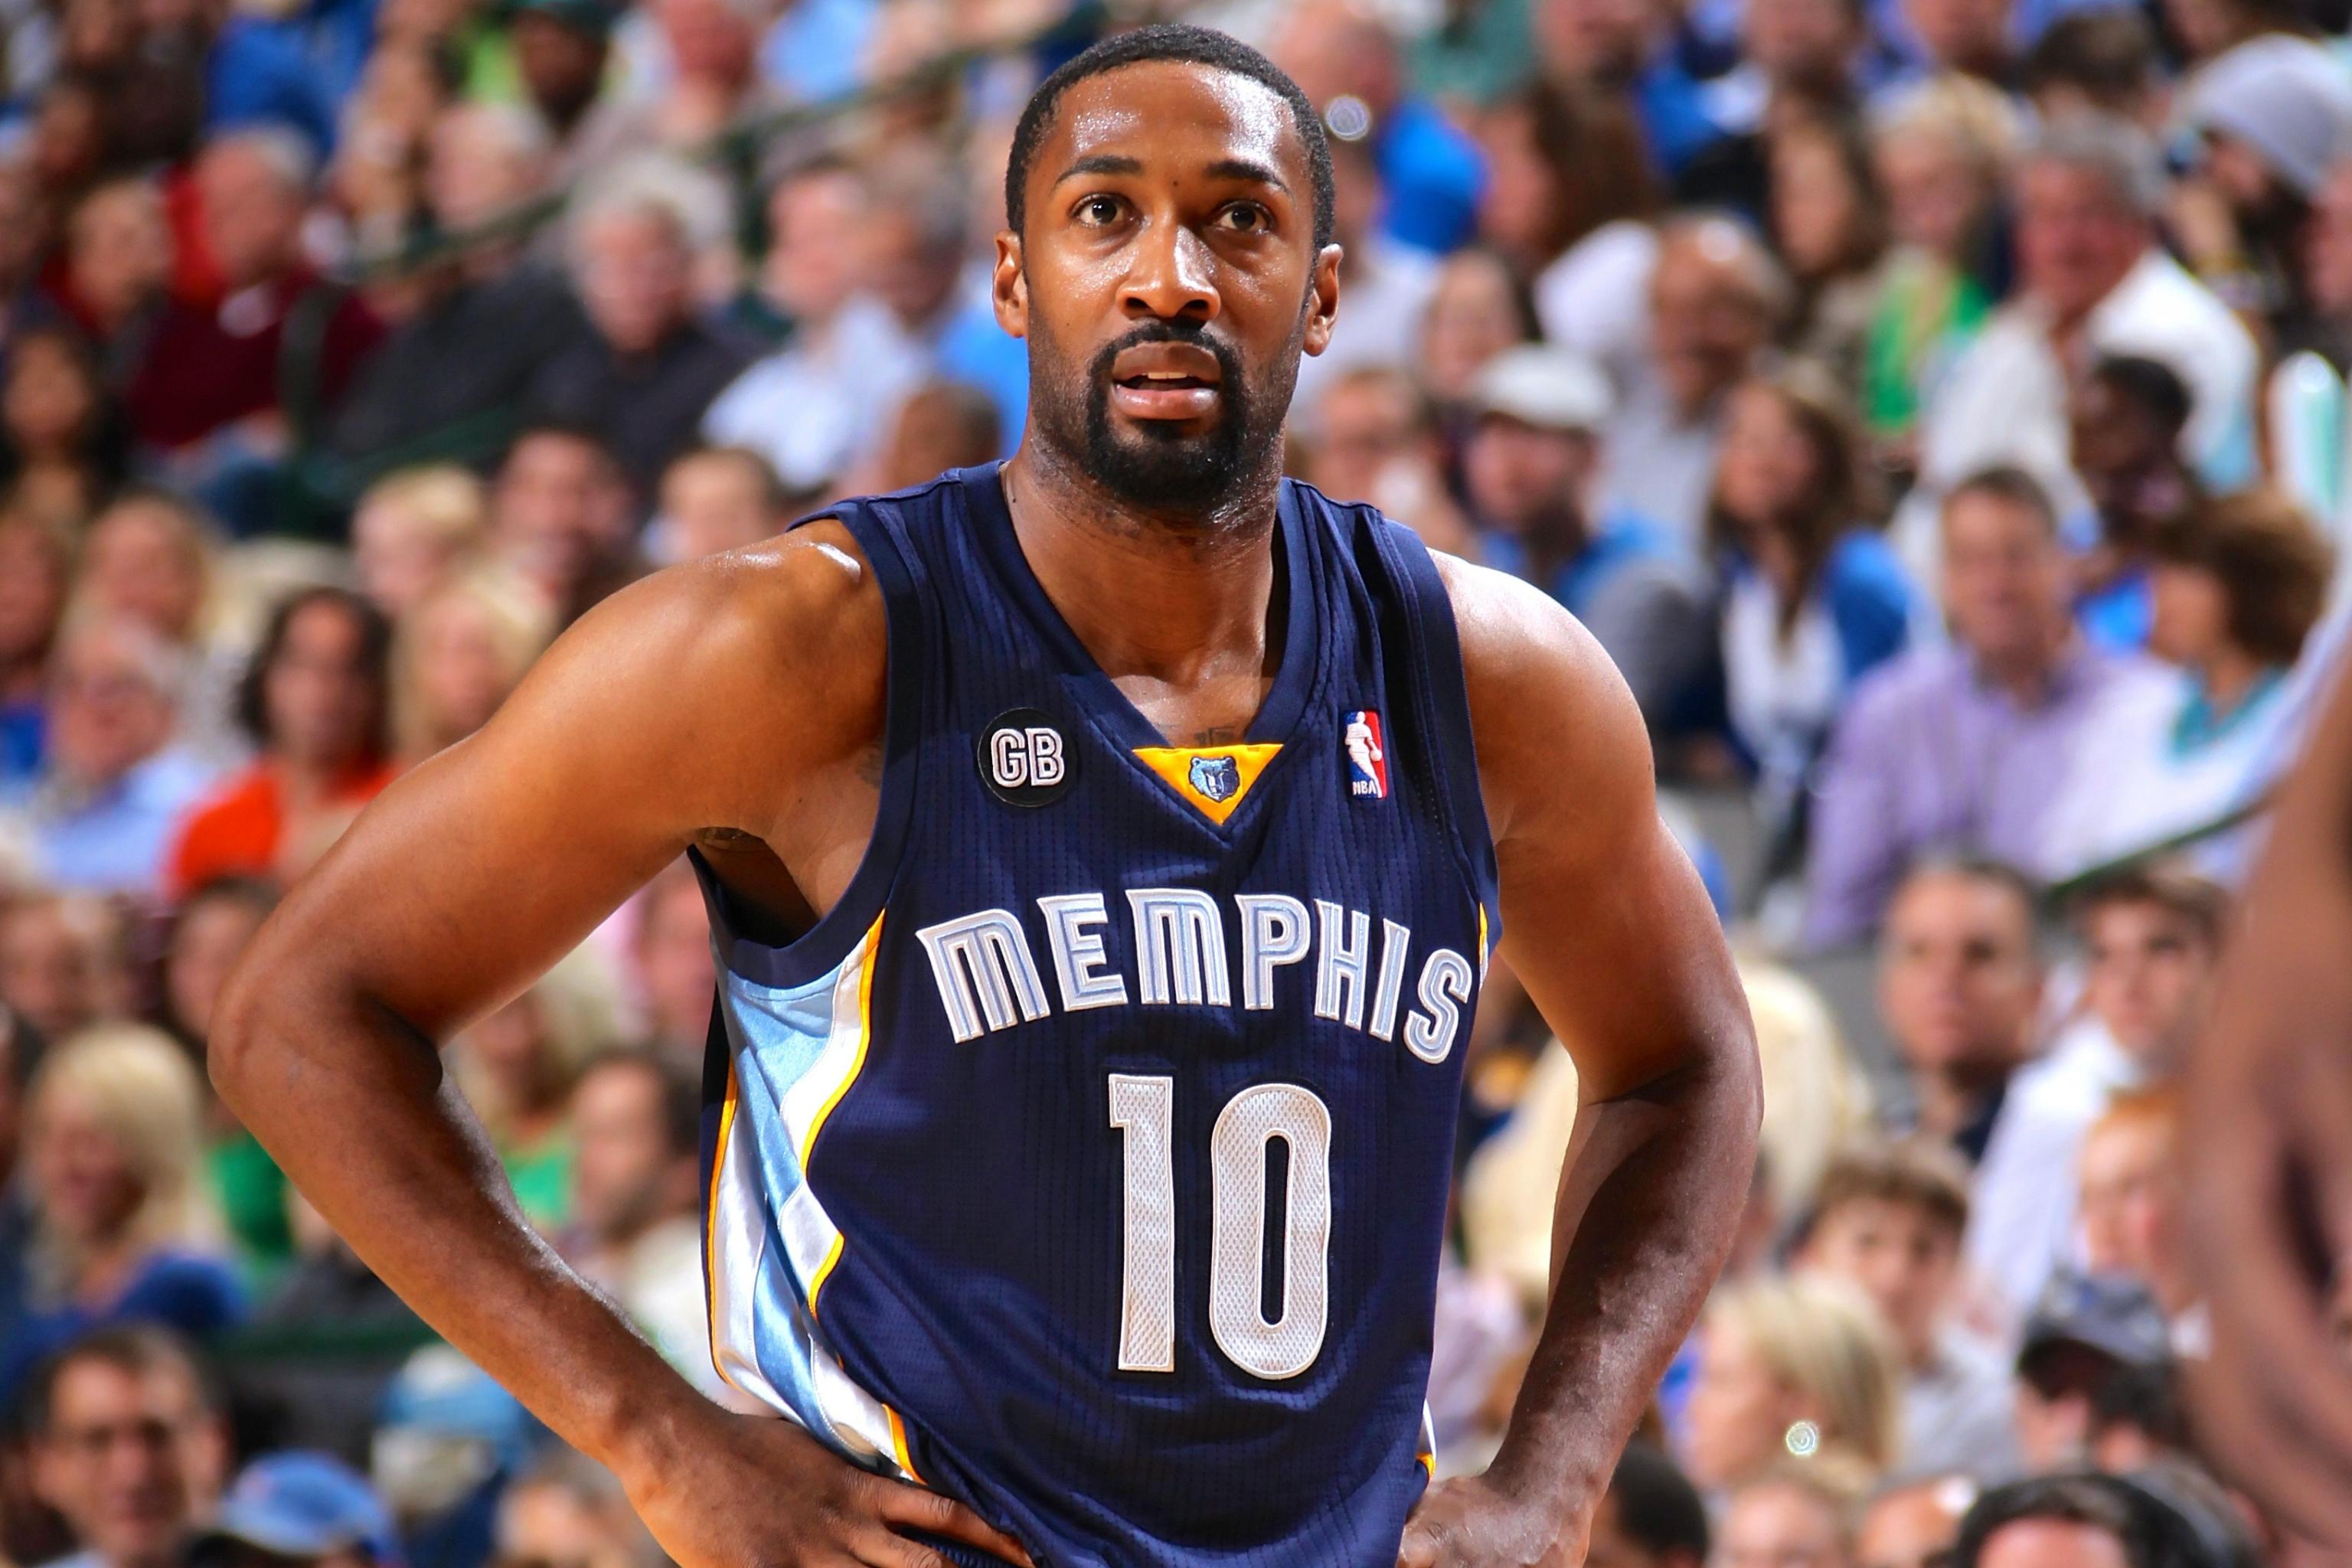 It's Official: Gilbert Arenas Will Play With The Shanghai Sharks